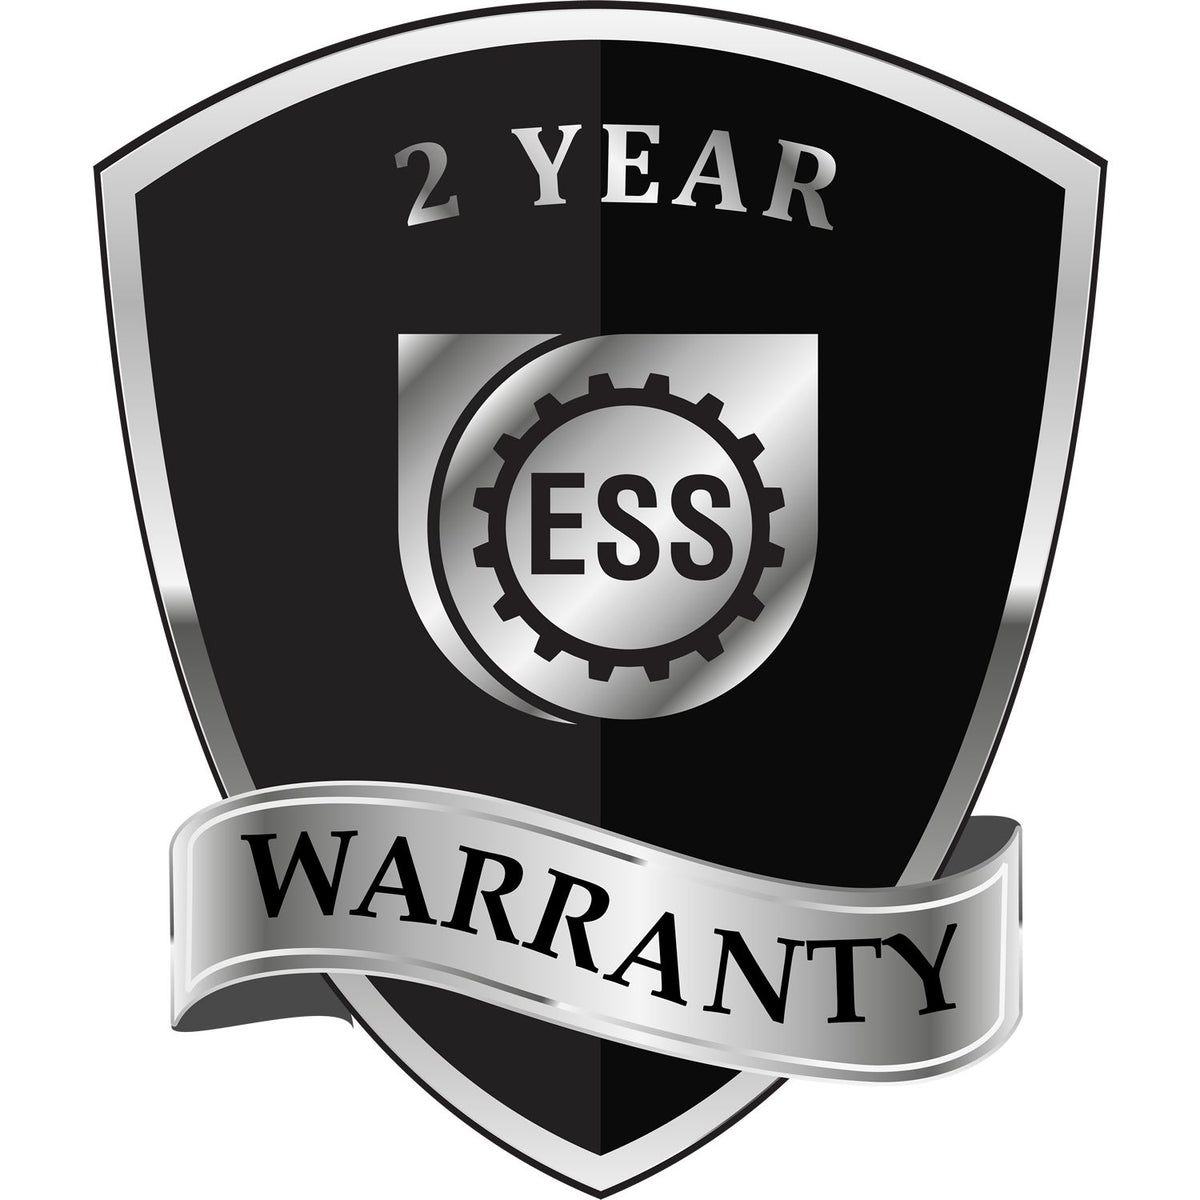 A black and silver badge or emblem showing warranty information for the Gift Indiana Architect Seal